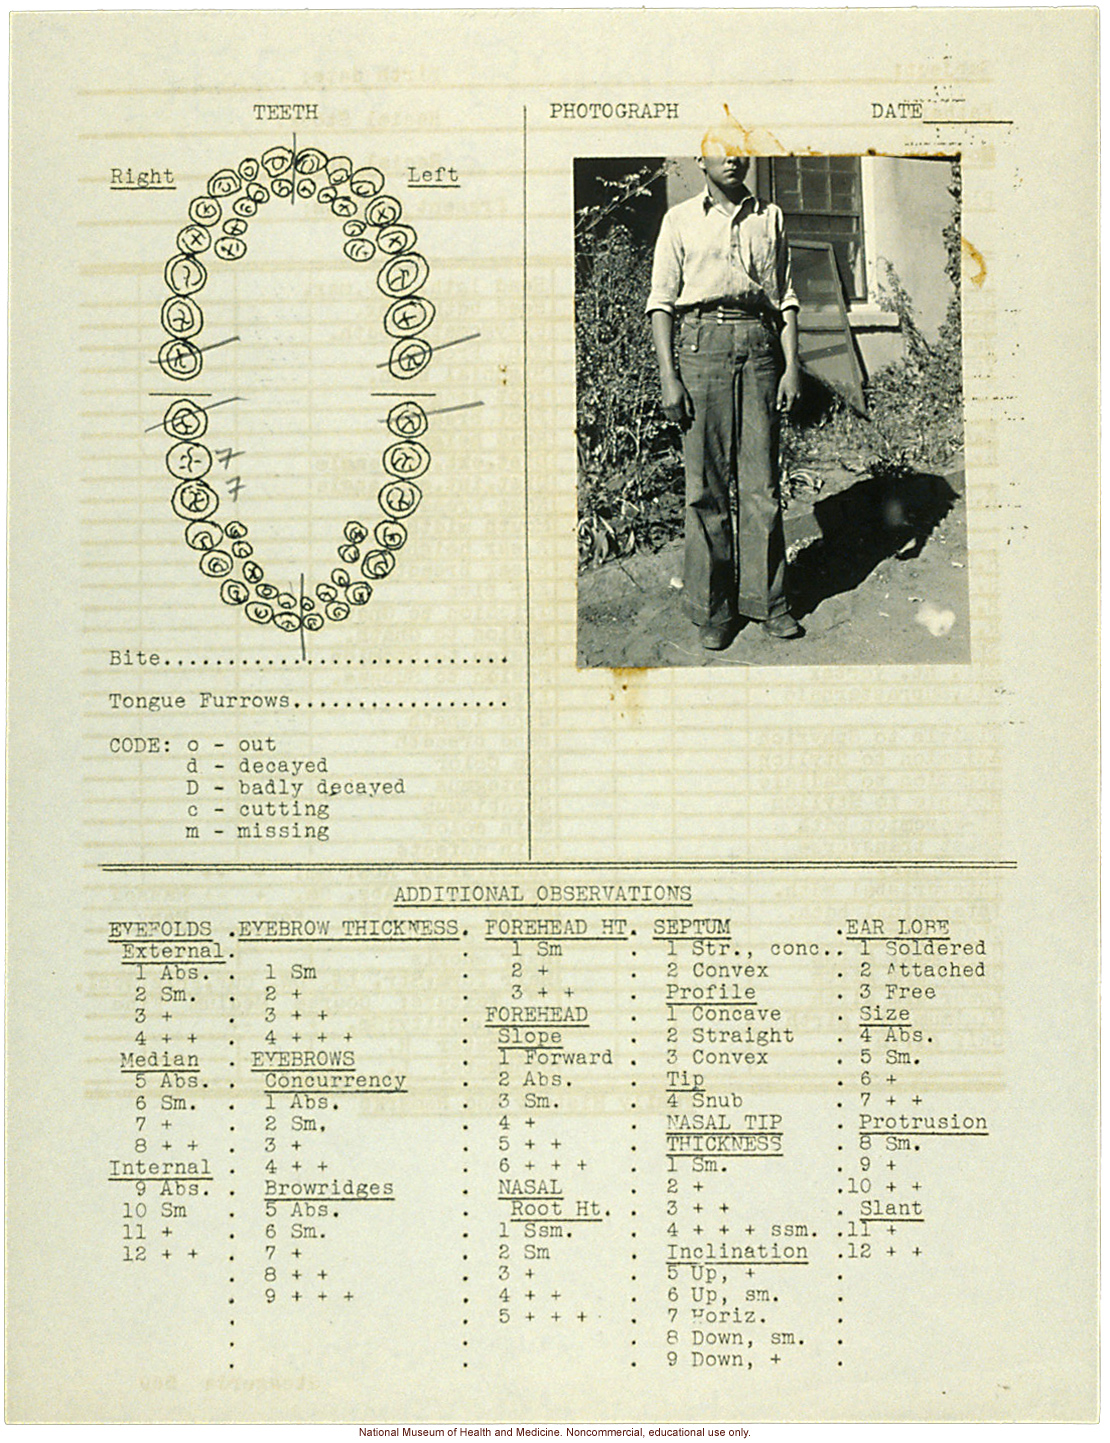 &quote;Growing Series&quote; of Navajo Male age 8-18, Tuba City and Ganado, Arizona (anthropometry, dental charts, and photographs)